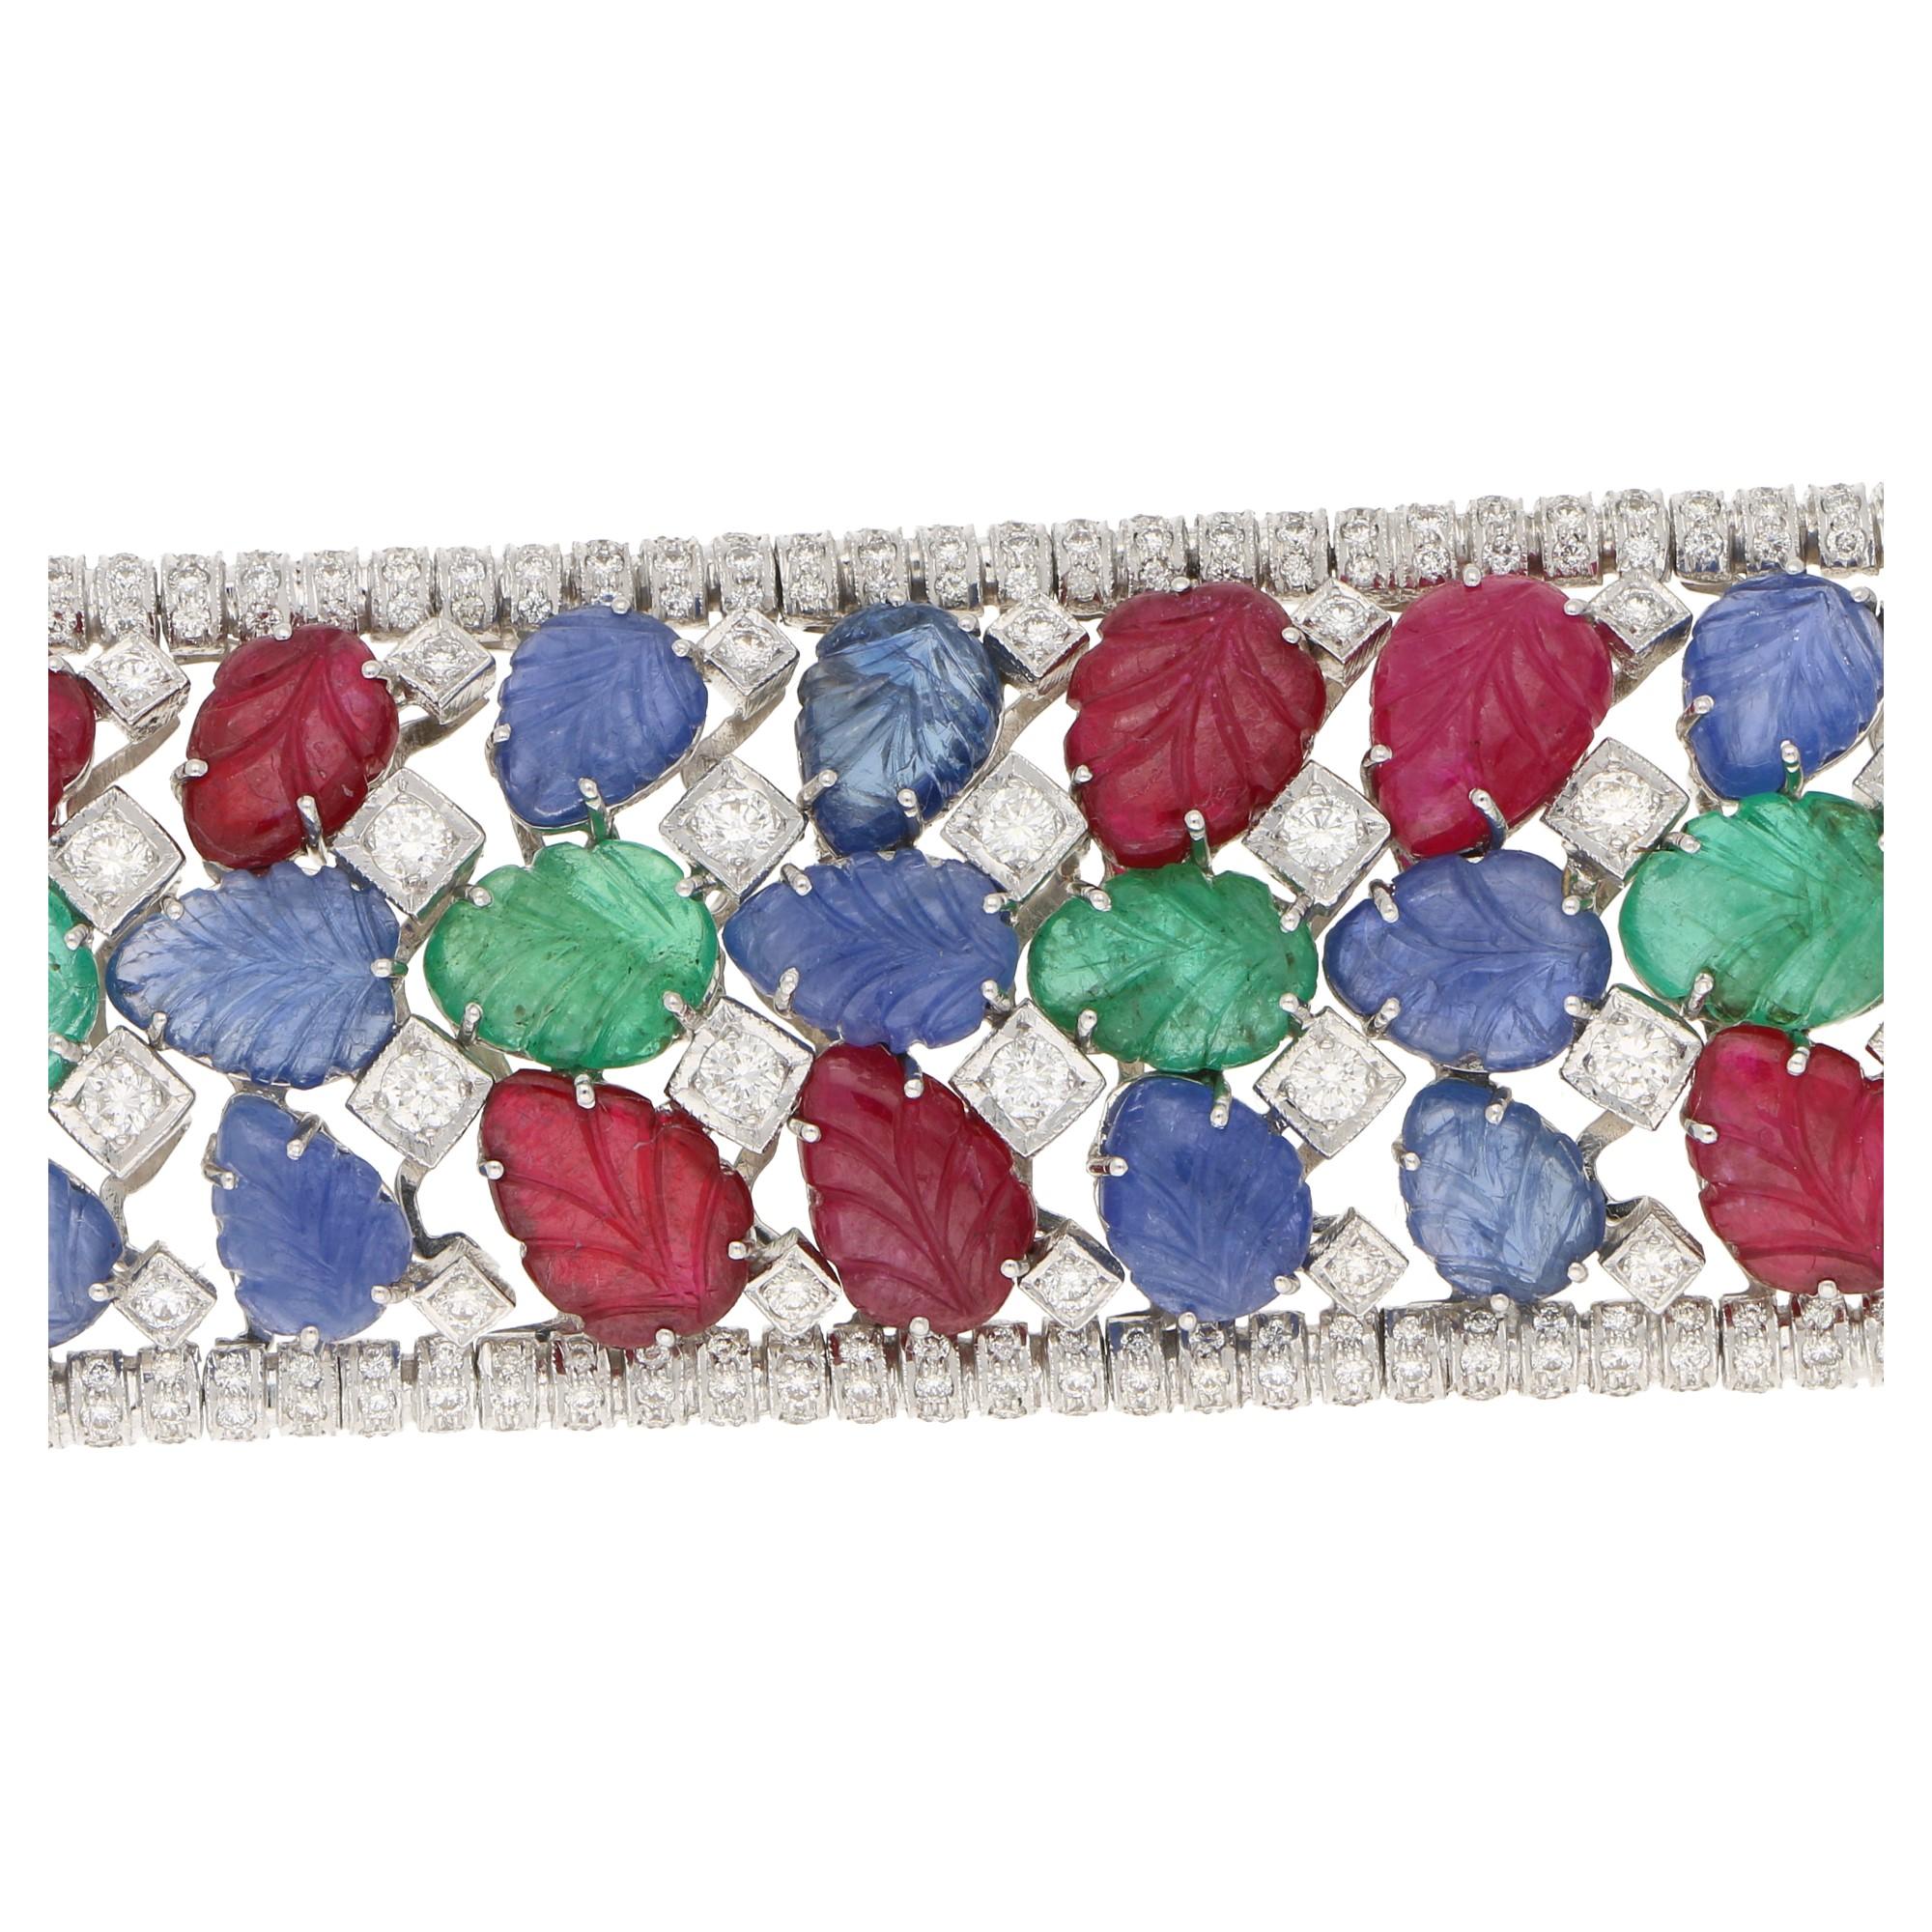 Carved Ruby, Emerald, Sapphire: 112.39 Carats
Brilliant Cut Diamonds: 7.13 Carats
G/H Color
SI Clarity 
18 Karat White Gold 
18.5cm long and 3cm wide

An elegant multi-gem set bracelet of contemporary make in the style of the Art Deco era, in